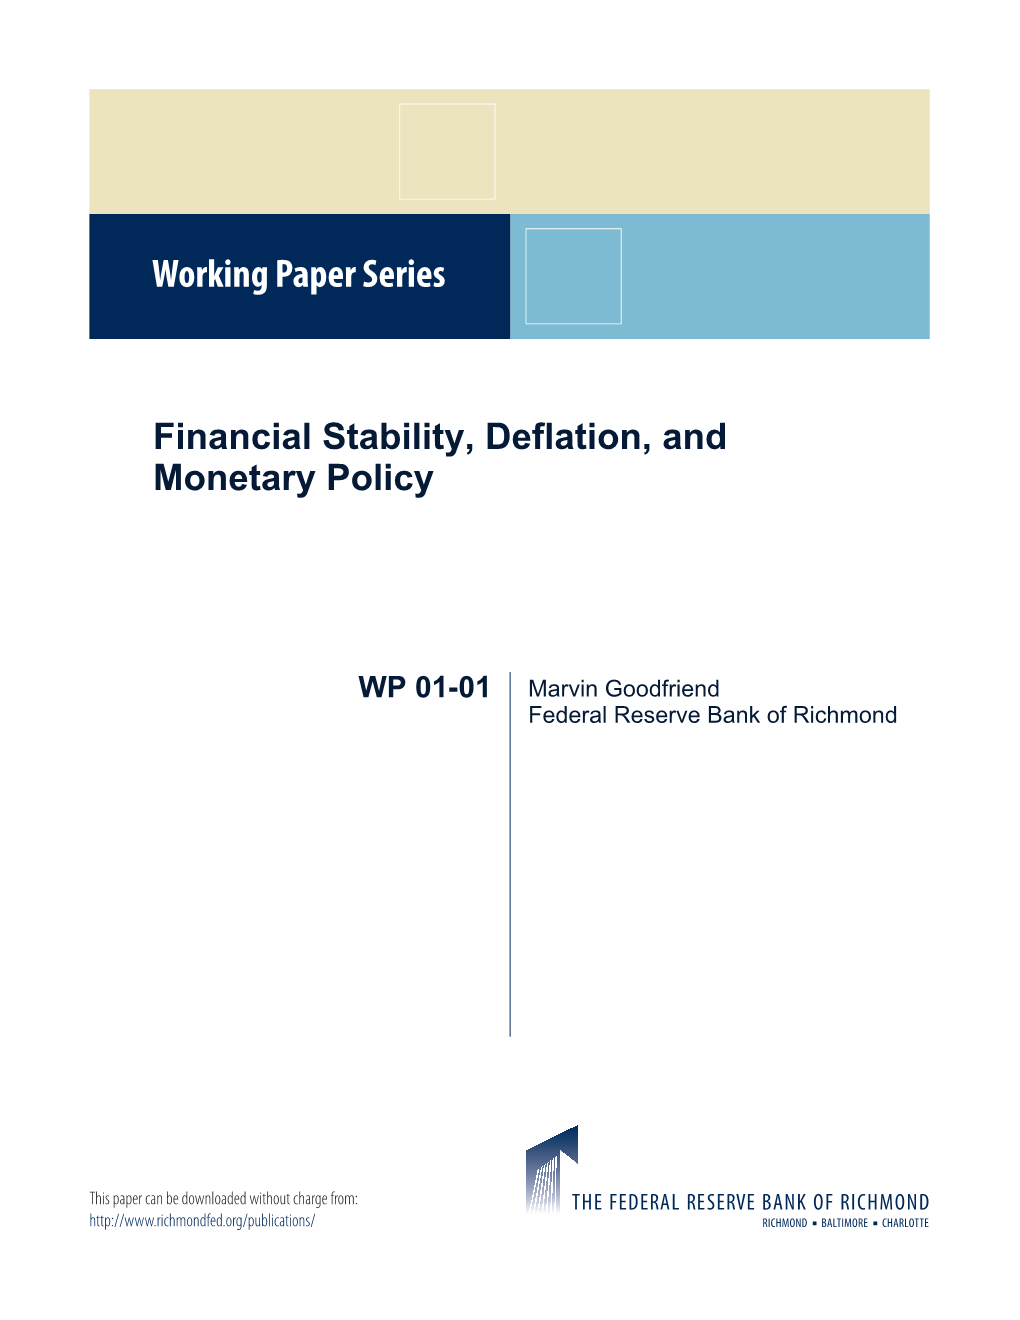 Financial Stability, Deflation, and Monetary Policy